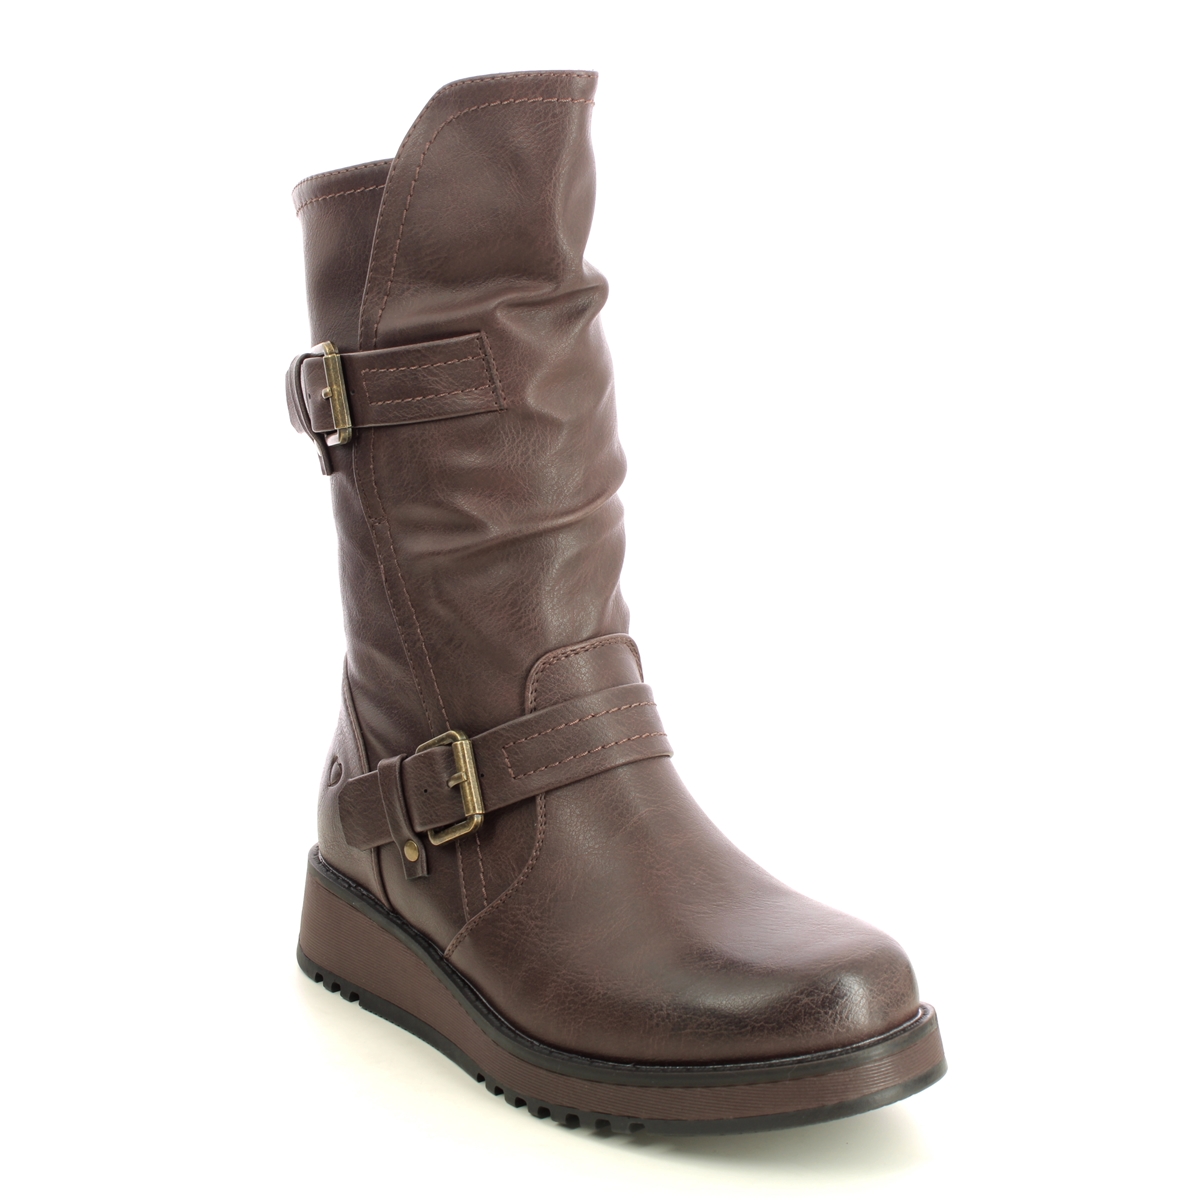 Heavenly Feet Hannah 4 Chocolate Brown Womens Mid Calf Boots 3507-27 In Size 5 In Plain Chocolate Brown